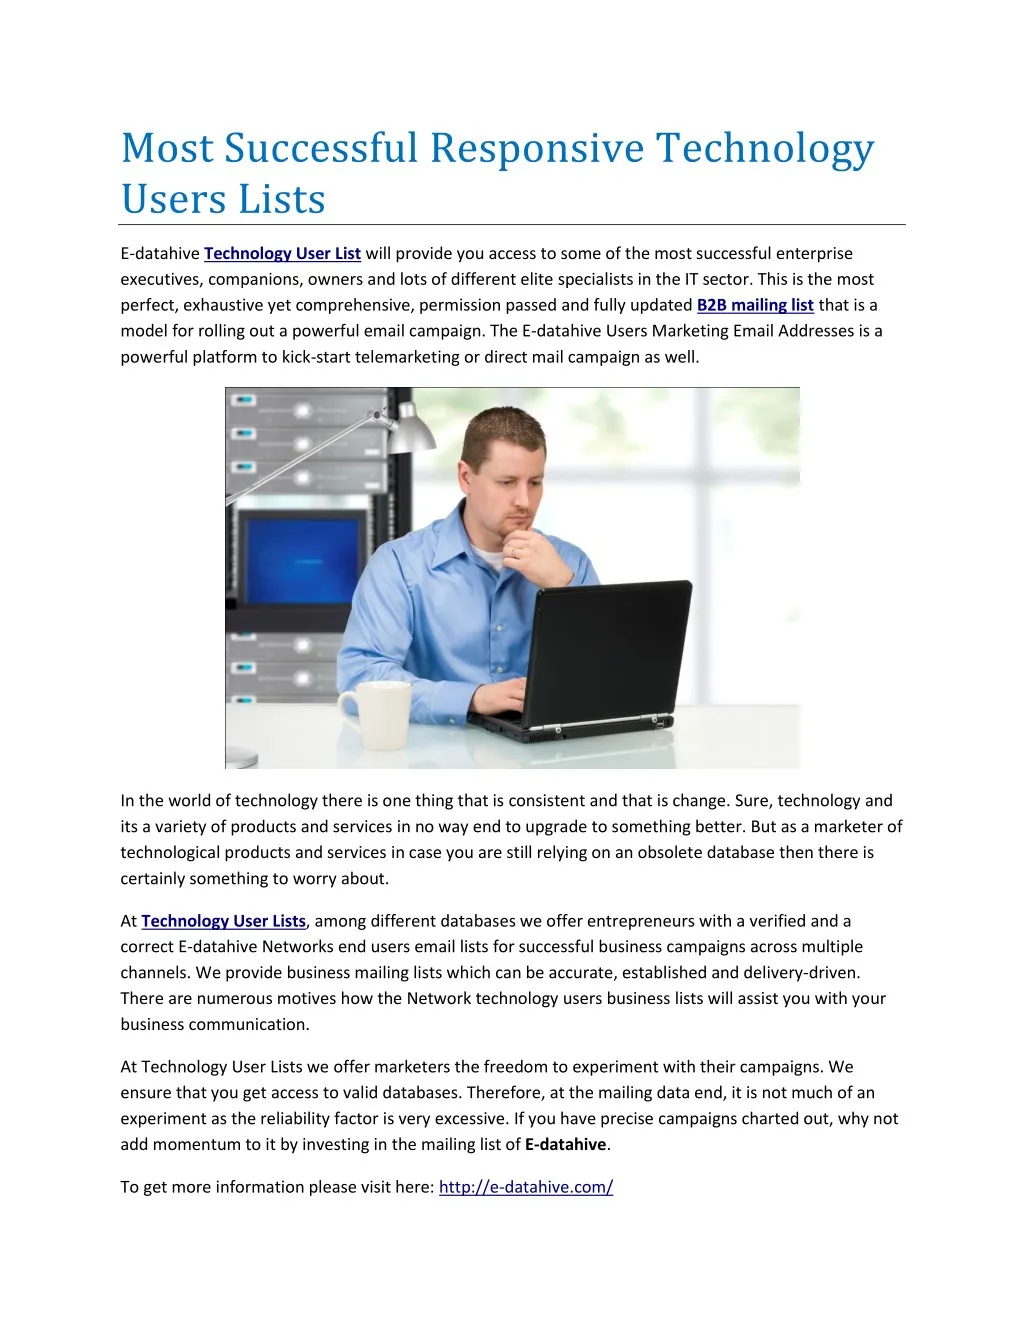 most successful responsive technology users lists